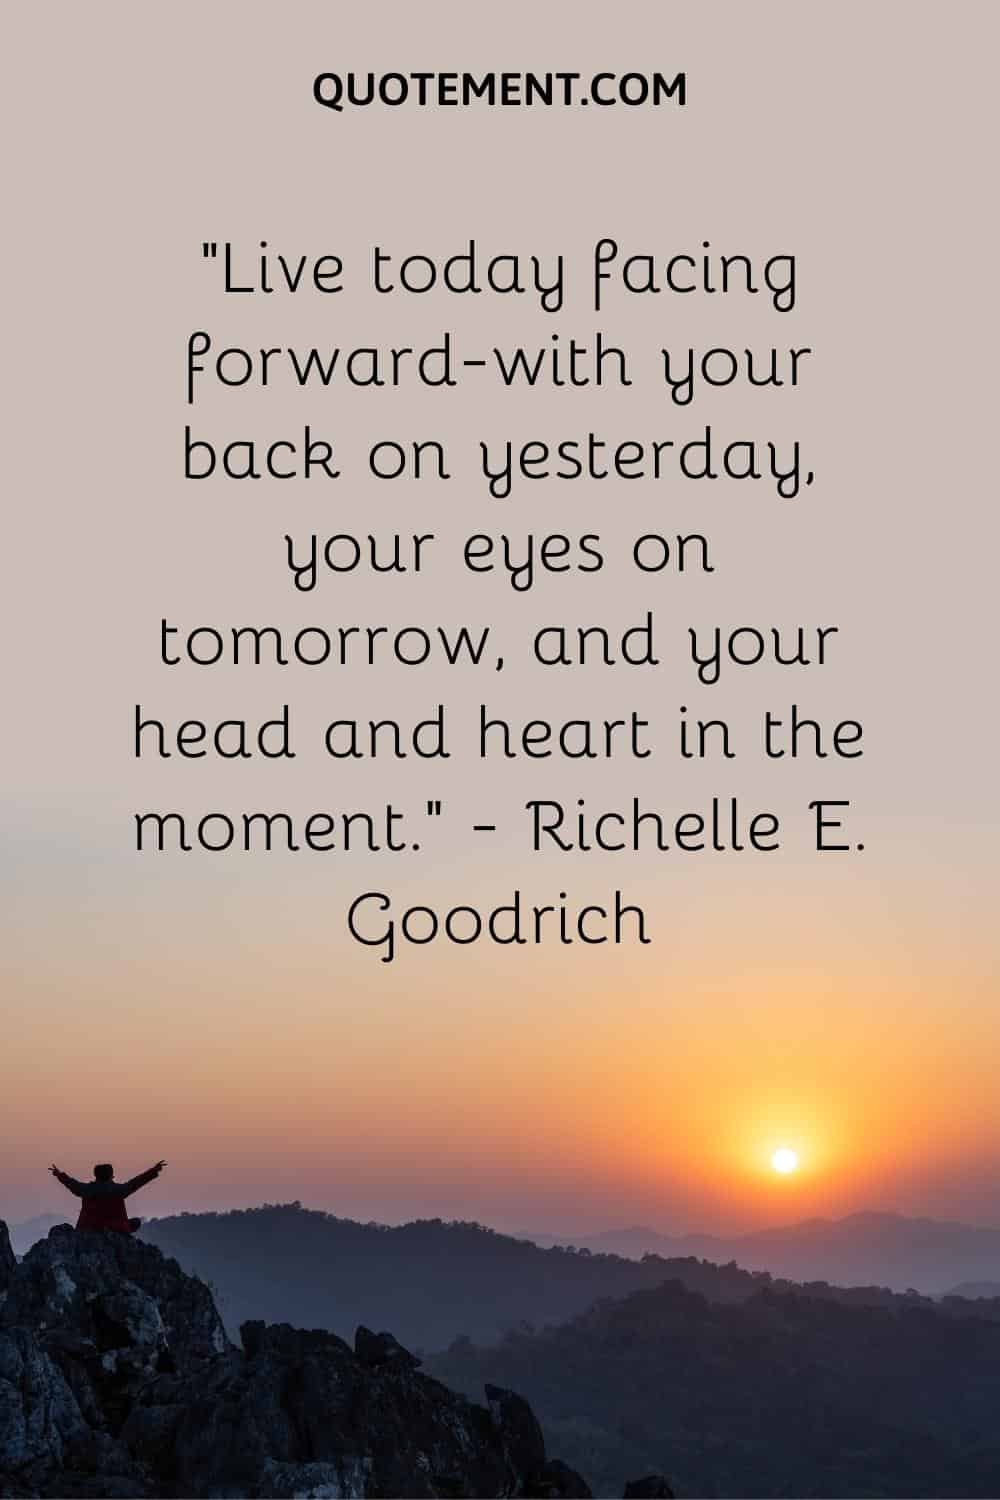 Live today facing forward—with your back on yesterday, your eyes on tomorrow, and your head and heart in the moment